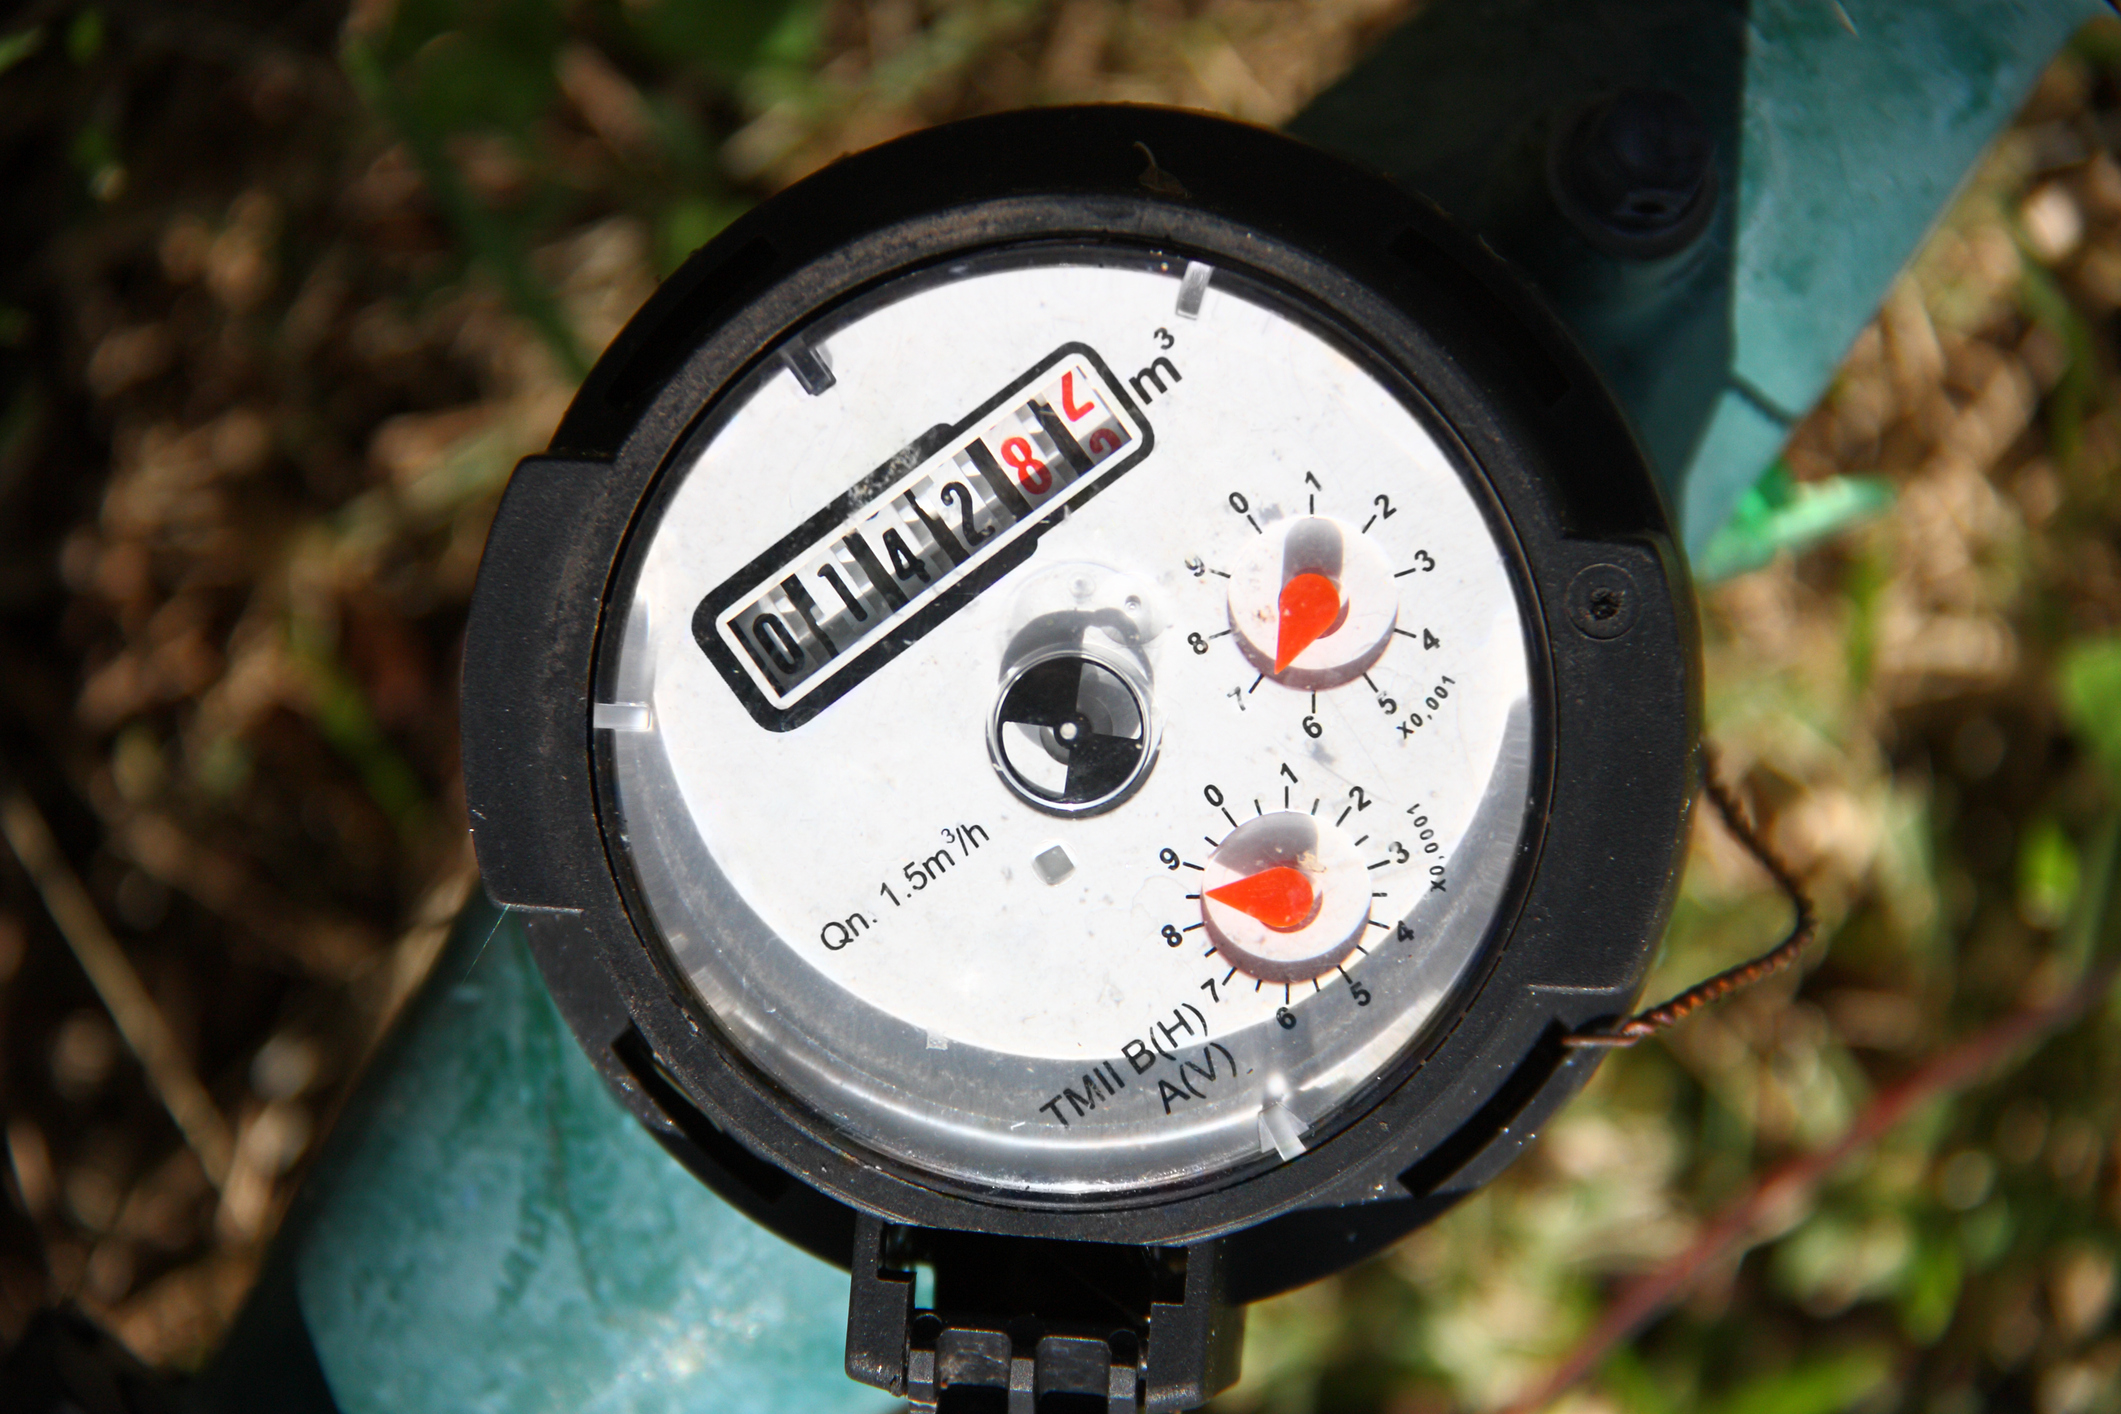 Water meter - controlling the water consume.